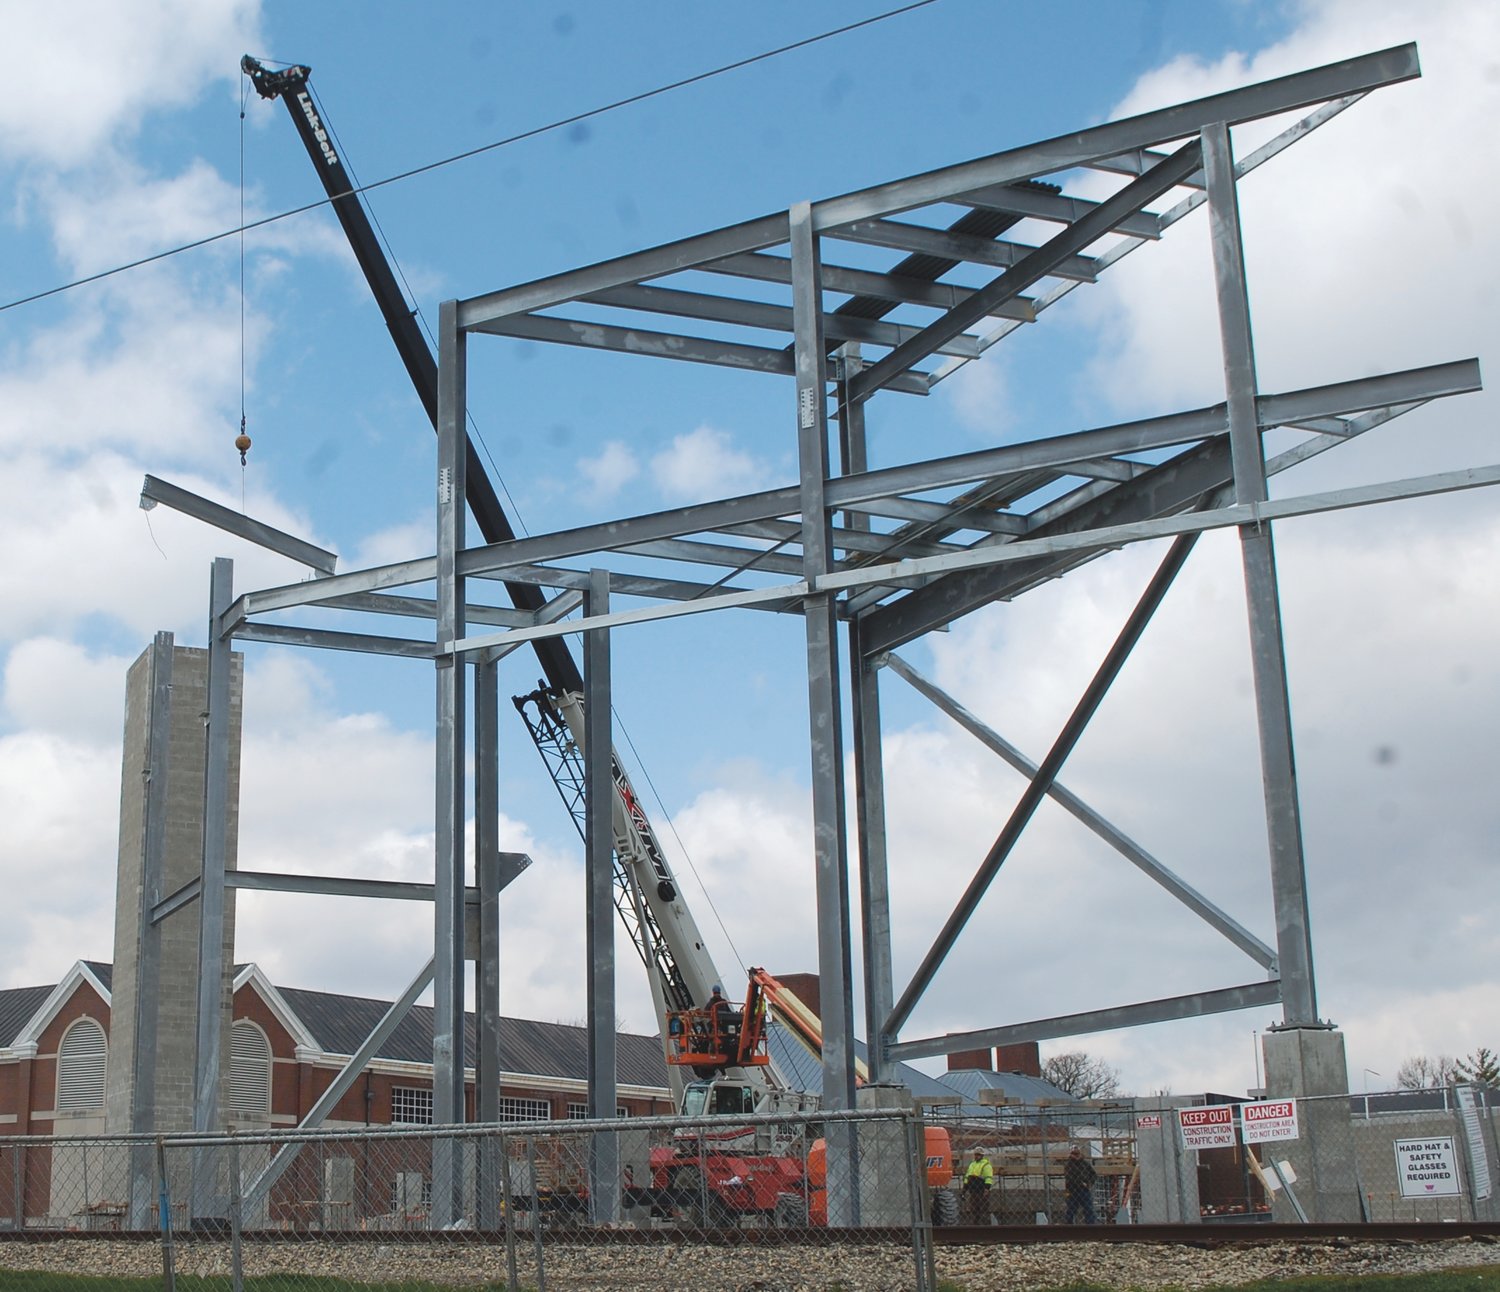 Steel was being set on Wednesday afternoon as construction of the new Wabash Football Stadium continues, and is on scheduled for completion by the Little Giants home opener against Rose Hulman on Sep. 5.